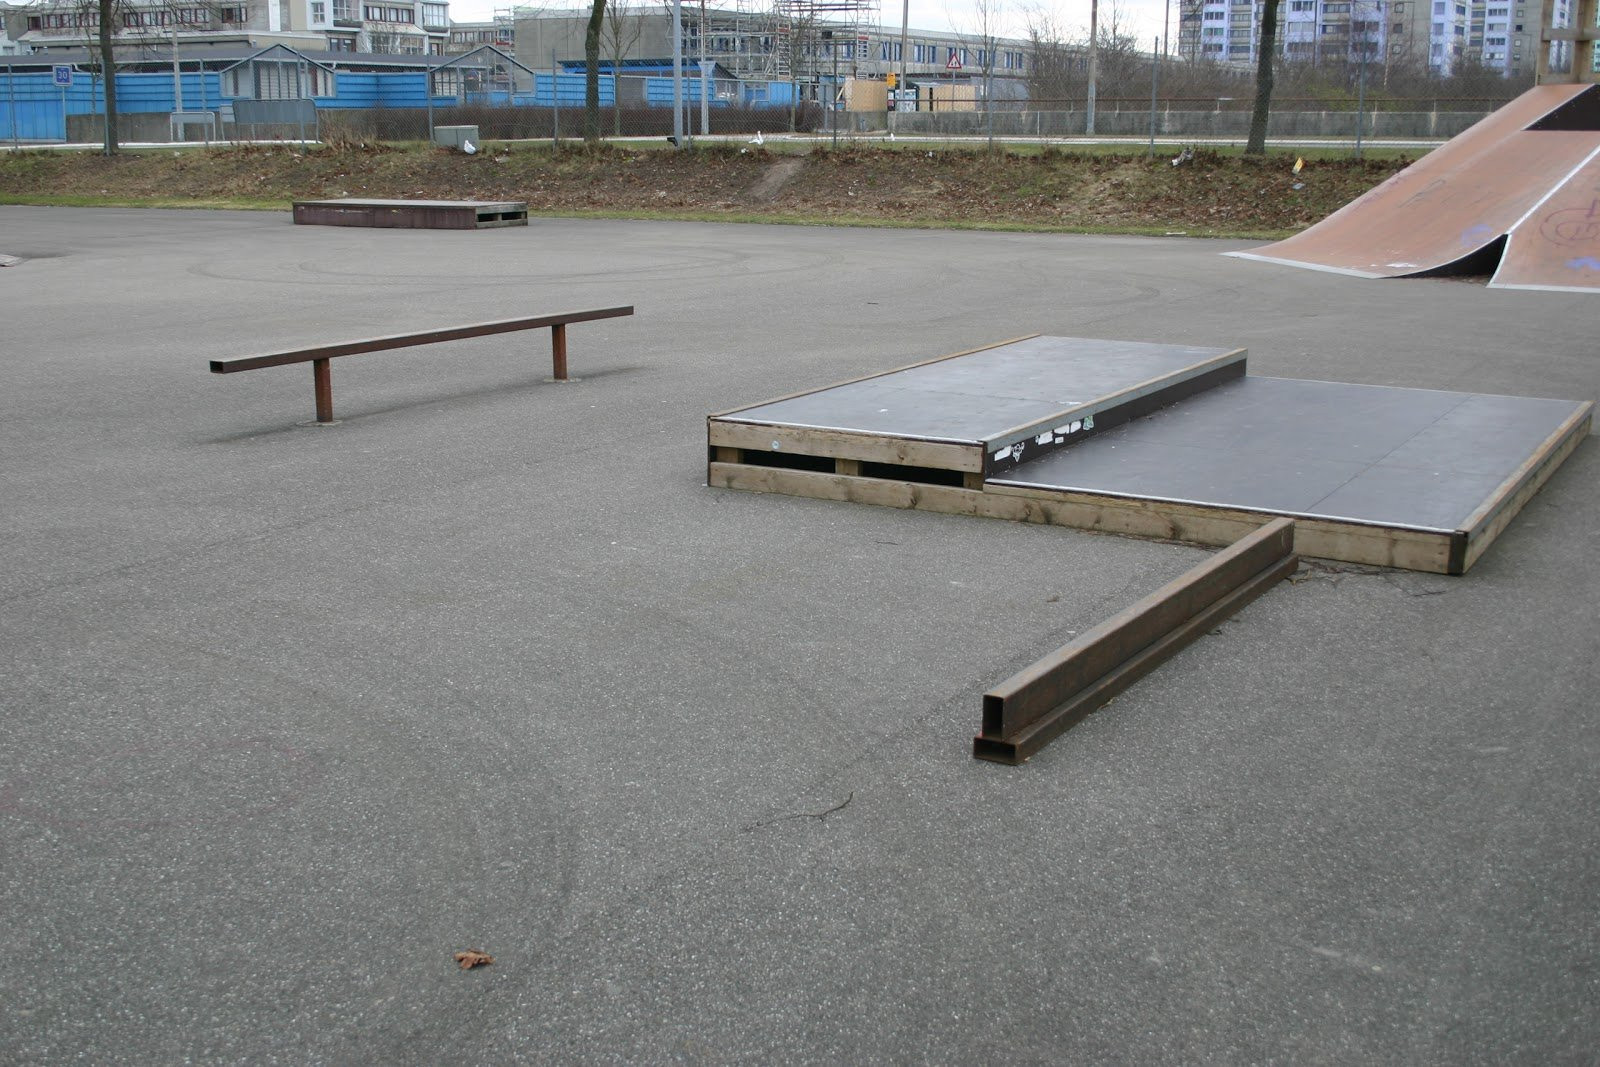 A rather large skating course with various obstacles. The park has a foundation of asphalt and there is an appropriate distance between the ramps. There is a large and a small bank, a quarter, a fun box, a pyramid and a couple of different rails. Curbs/ledges in different sizes and a movable manual pad. It is possible to buy food and beverages at a kiosk which is about 5-10 minutes away. The nearest station is Vallensbæk, which is walking distance from the park (about 15 minutes). You will have everything you need at the park, however, it does not offer many opportunities for creative lines. Therefore, park is recommended for beginners, however, more experienced skaters should not go out of their way to visit the park.